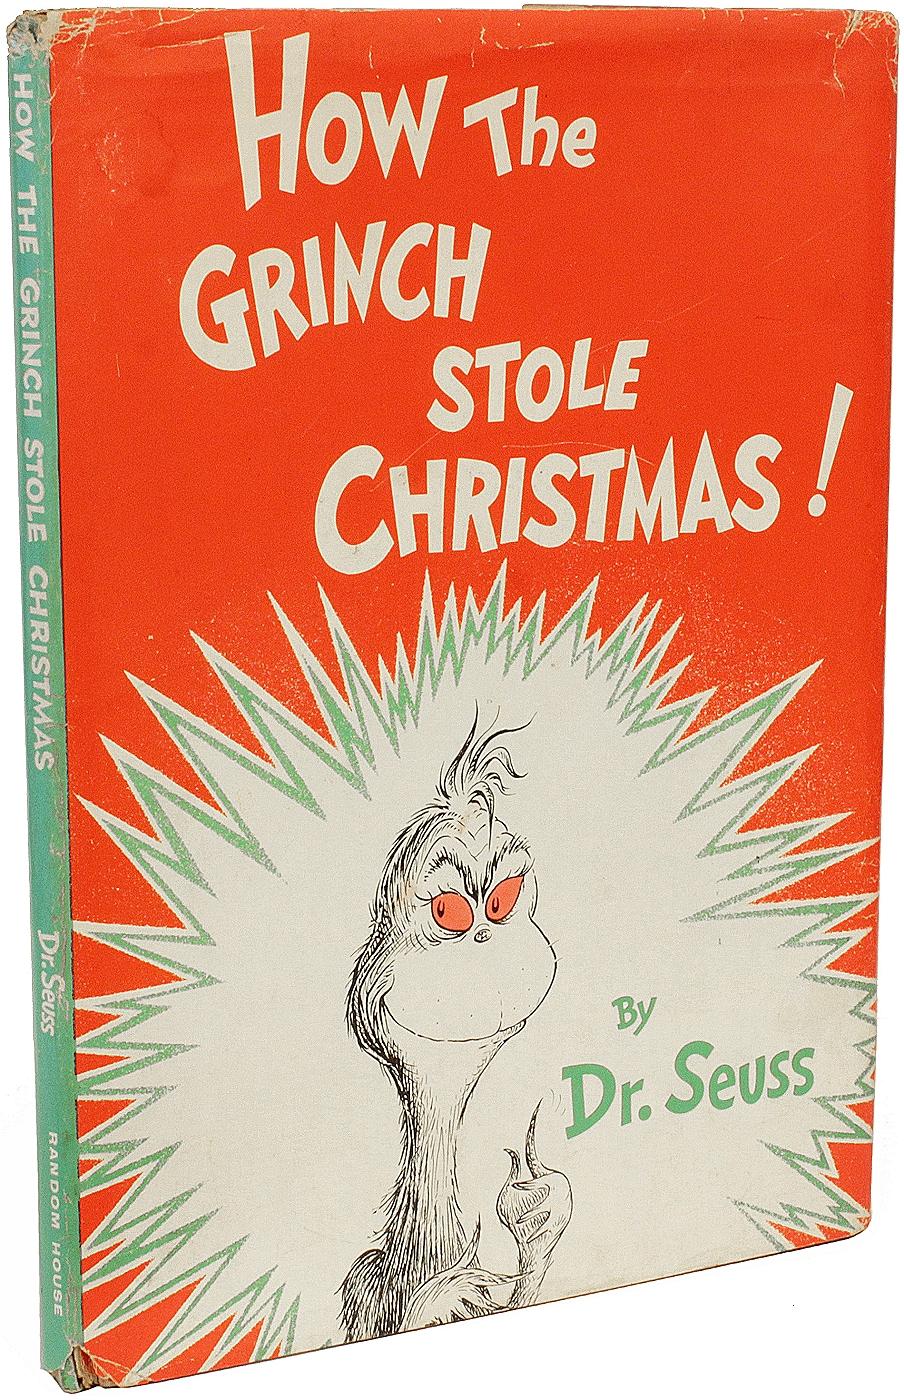 AUTHOR: GEISEL, Theodore: (Dr. Seuss). 

TITLE: How The Grinch Stole Christmas. NY: Random House, 1957.

DESCRIPTION: FIRST EDITION PRESENTATION COPY. 1 vol., inscribed by Seuss on the verso of the front endleaf 